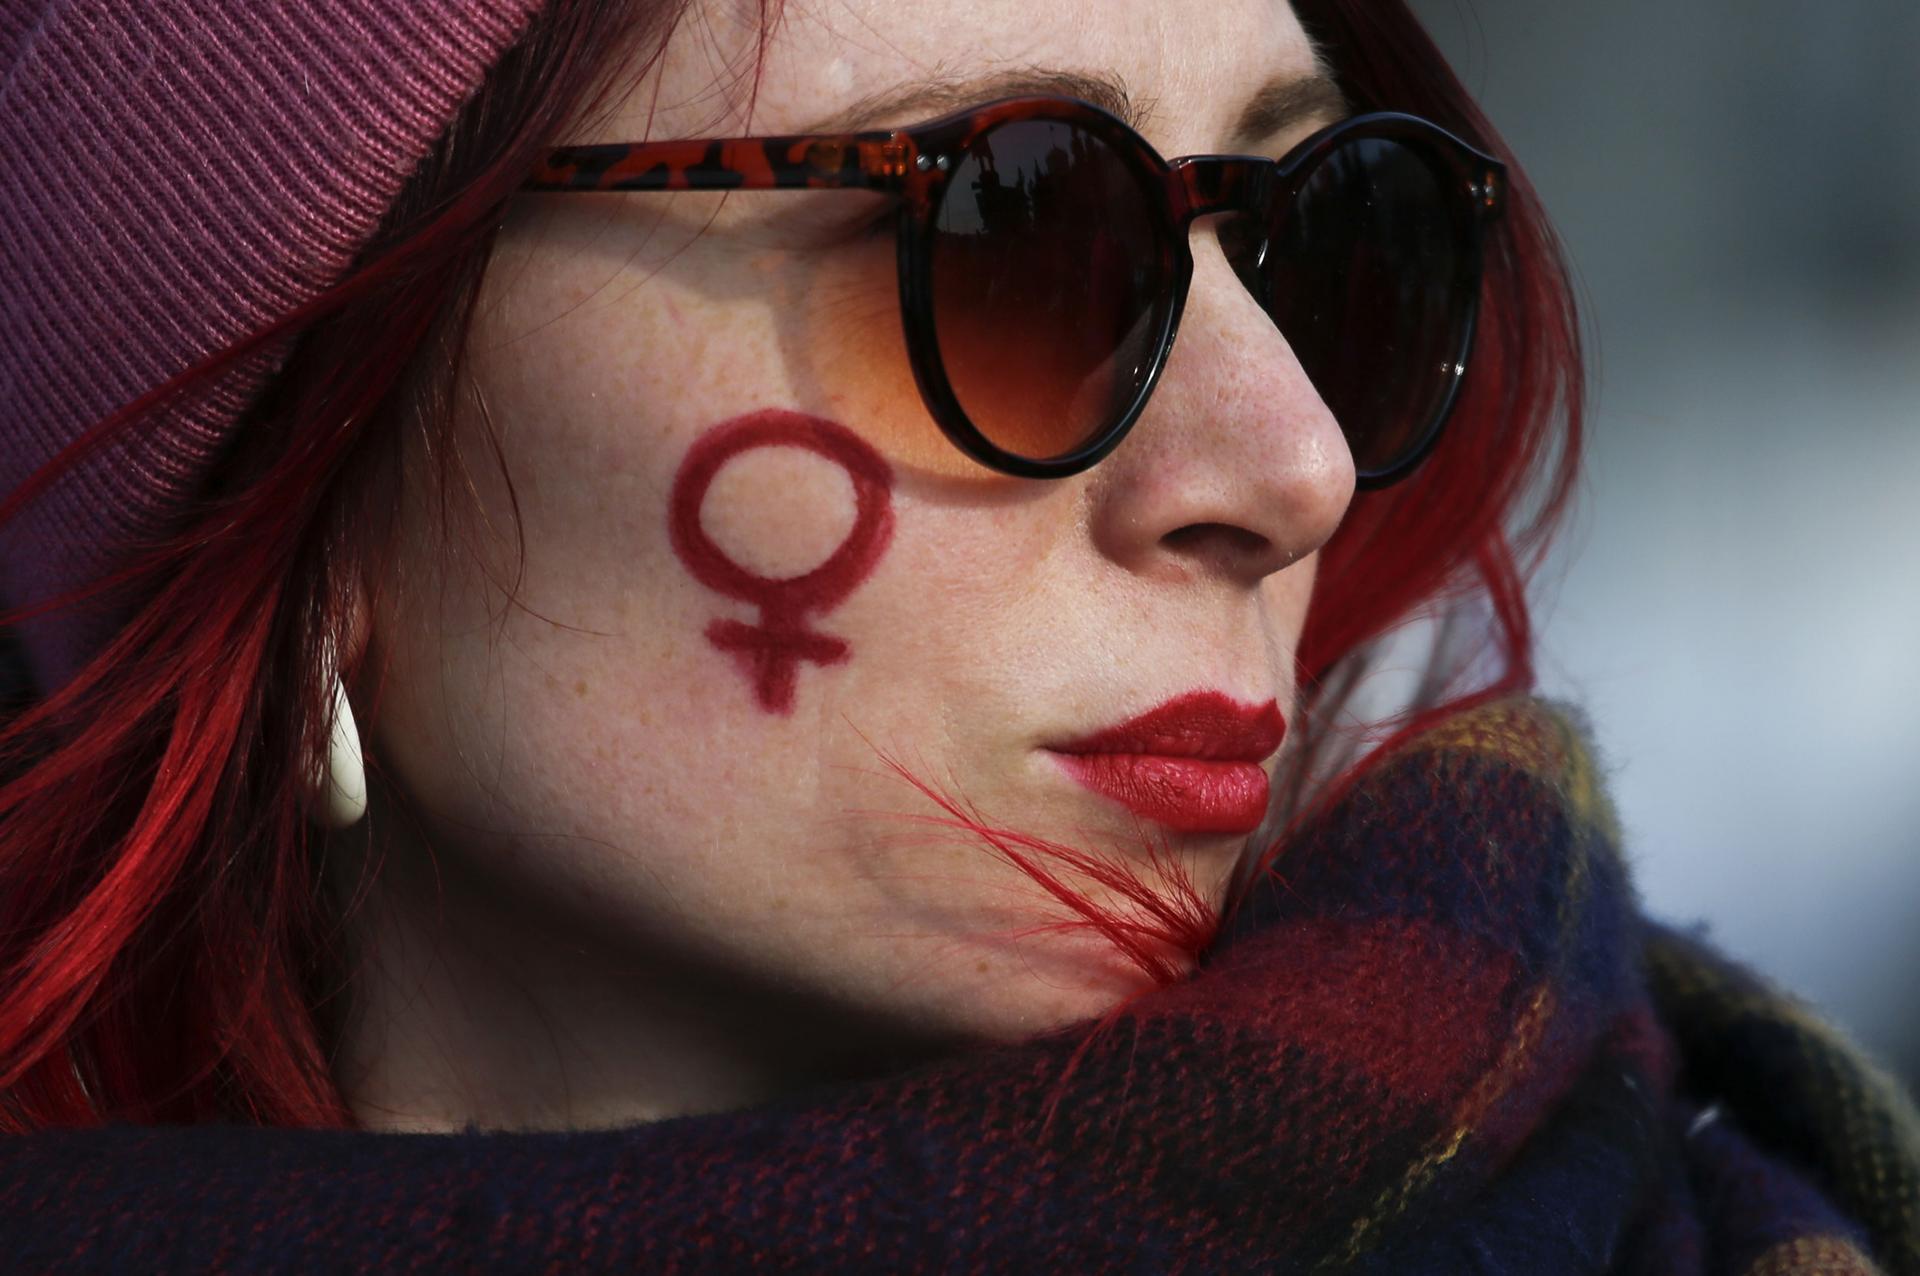 A woman has drawn the symbol for women on her cheek